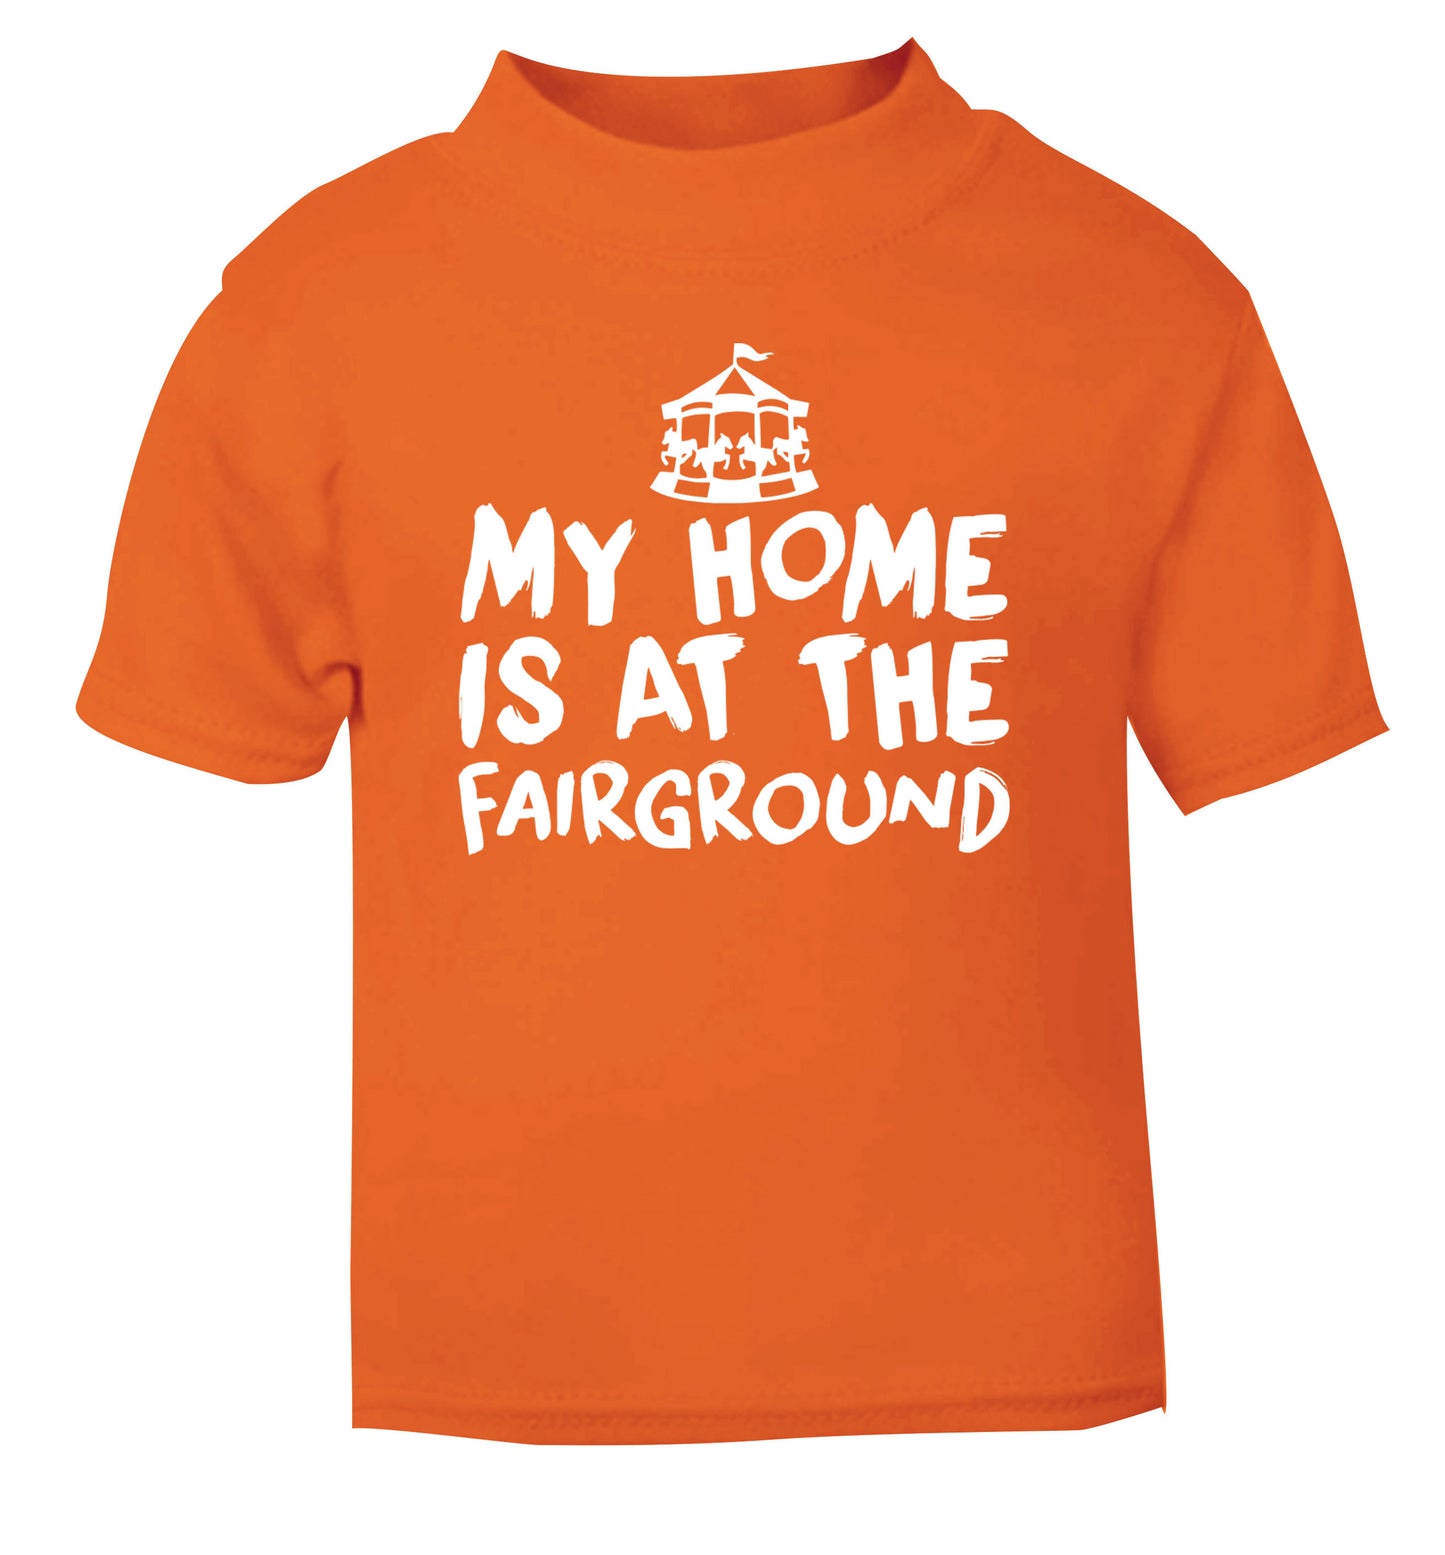 My home is at the fairground orange Baby Toddler Tshirt 2 Years